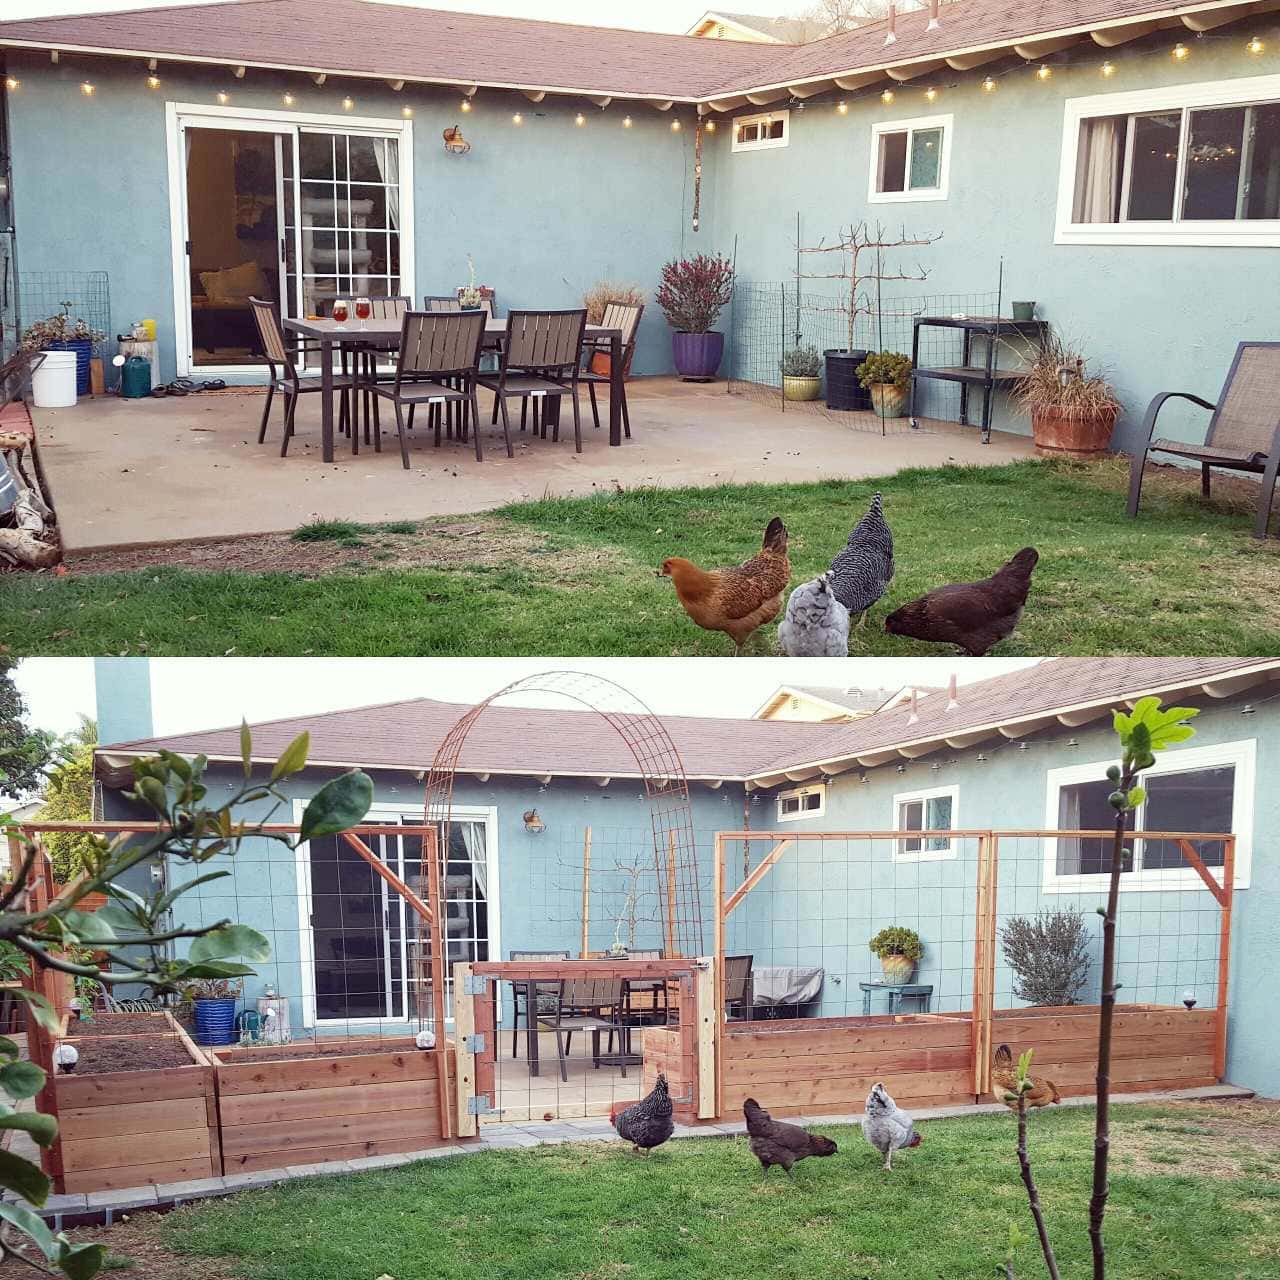 Before and after photos of a patio and backyard garden. The first shows the open patio and chickens on the adjacent lawn. The after photo shows the patio now enclosed by tall raised garden beds and trellises, blocking the chickens from getting to the patio. 